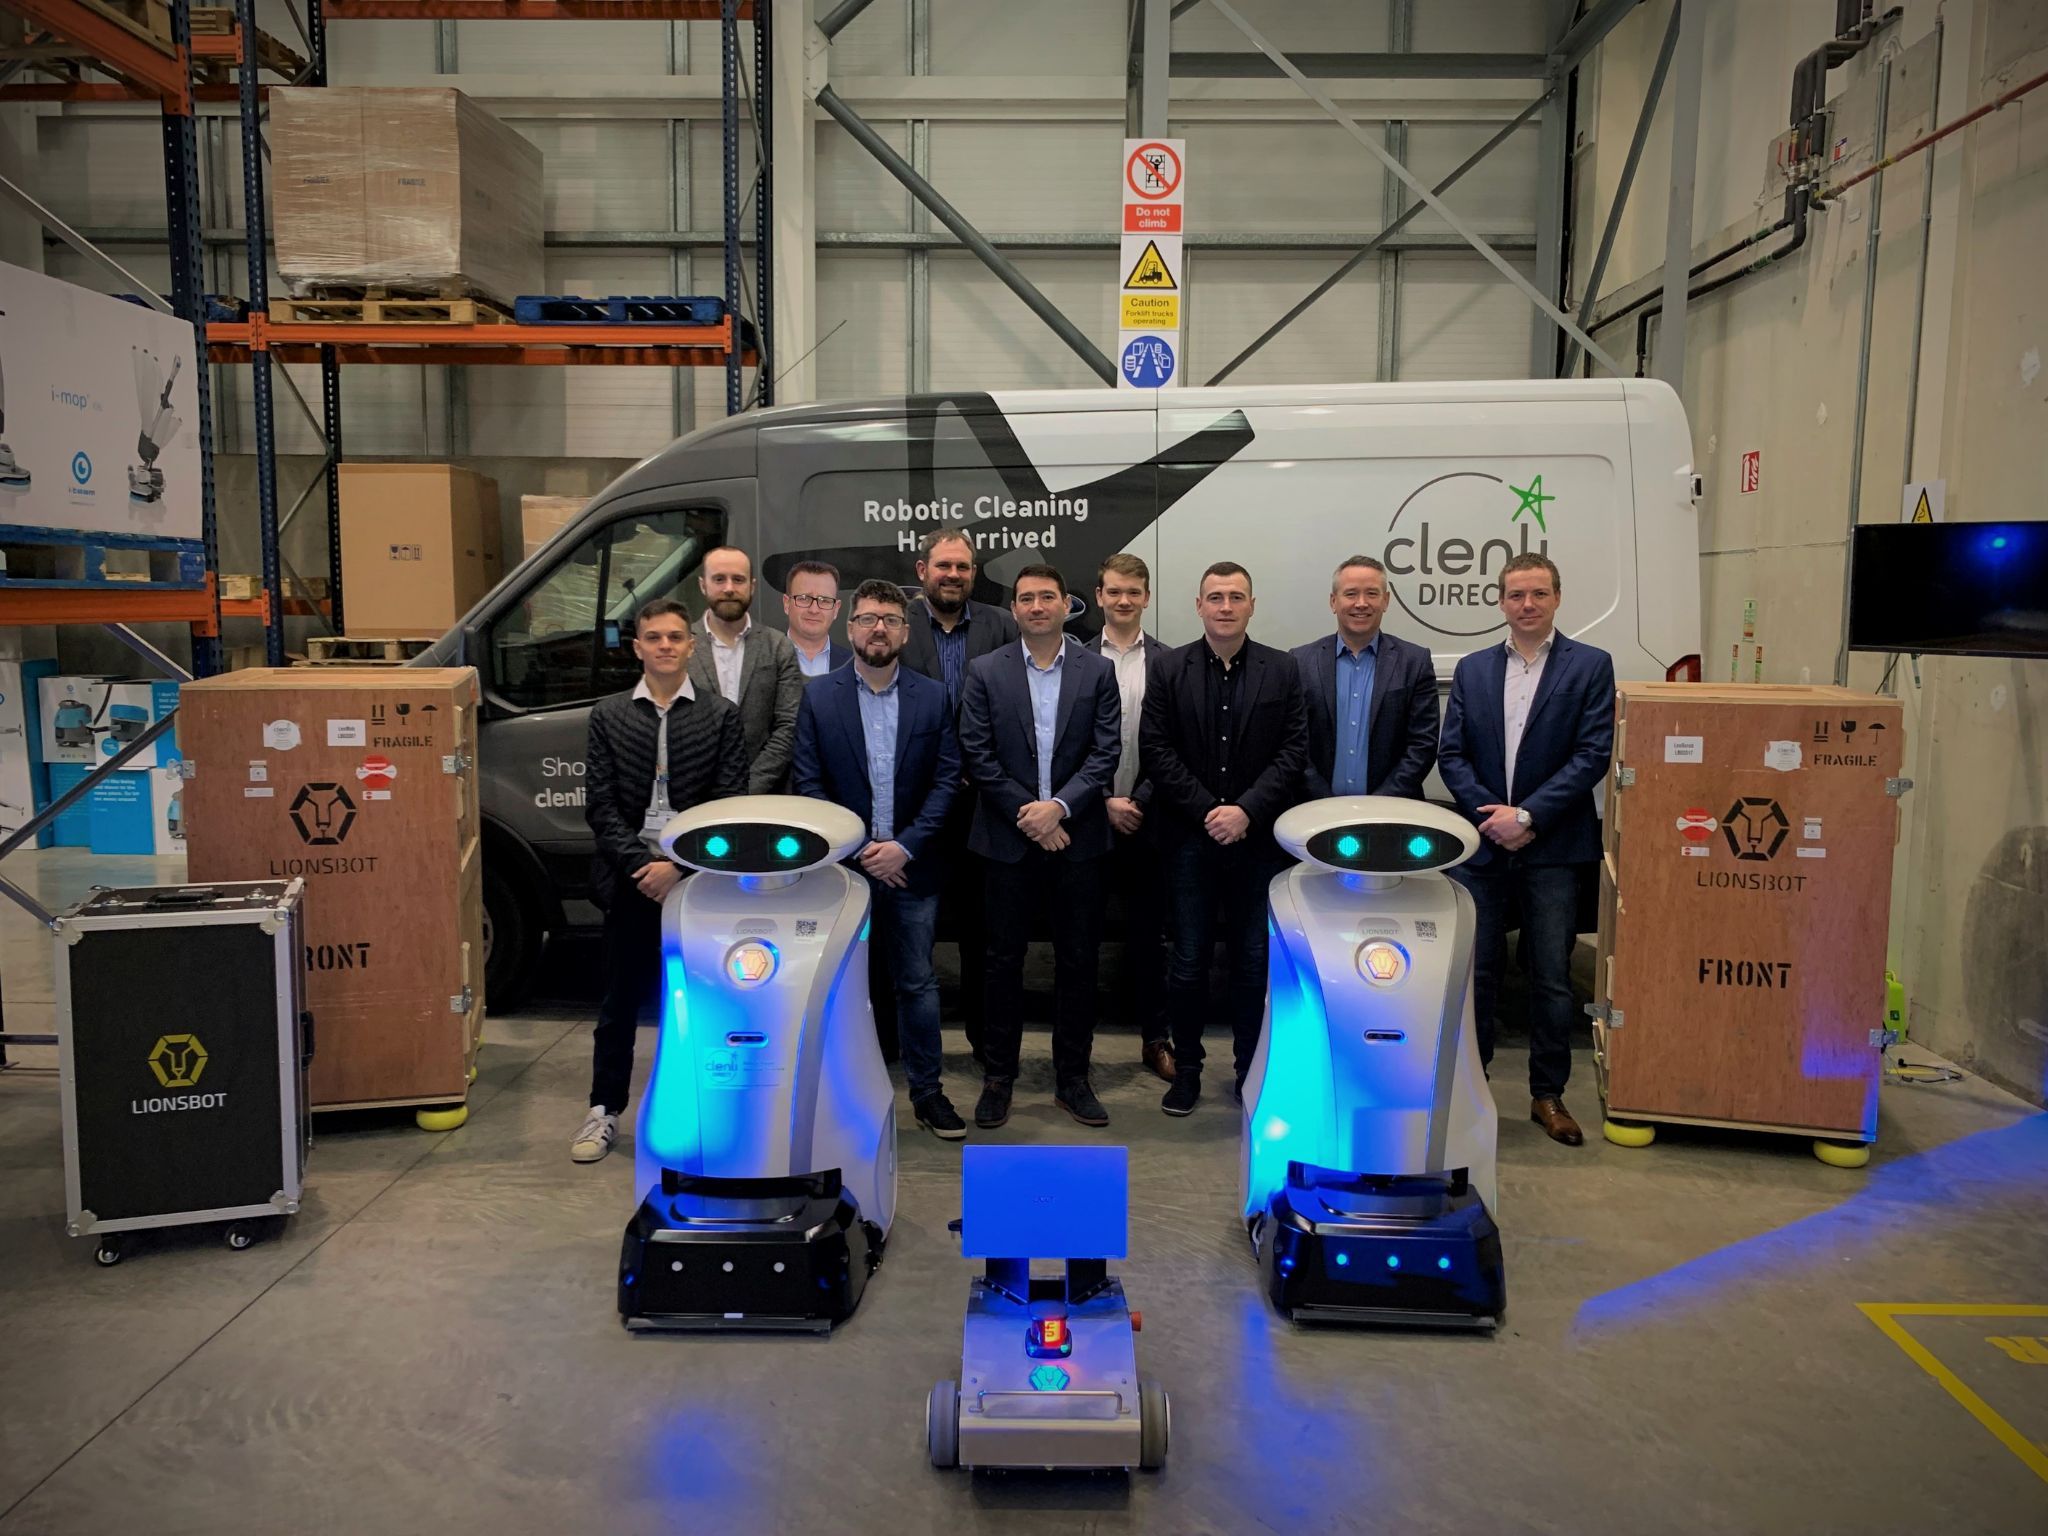 Clenli Direct Team with LeoBots Robotic Cleaners